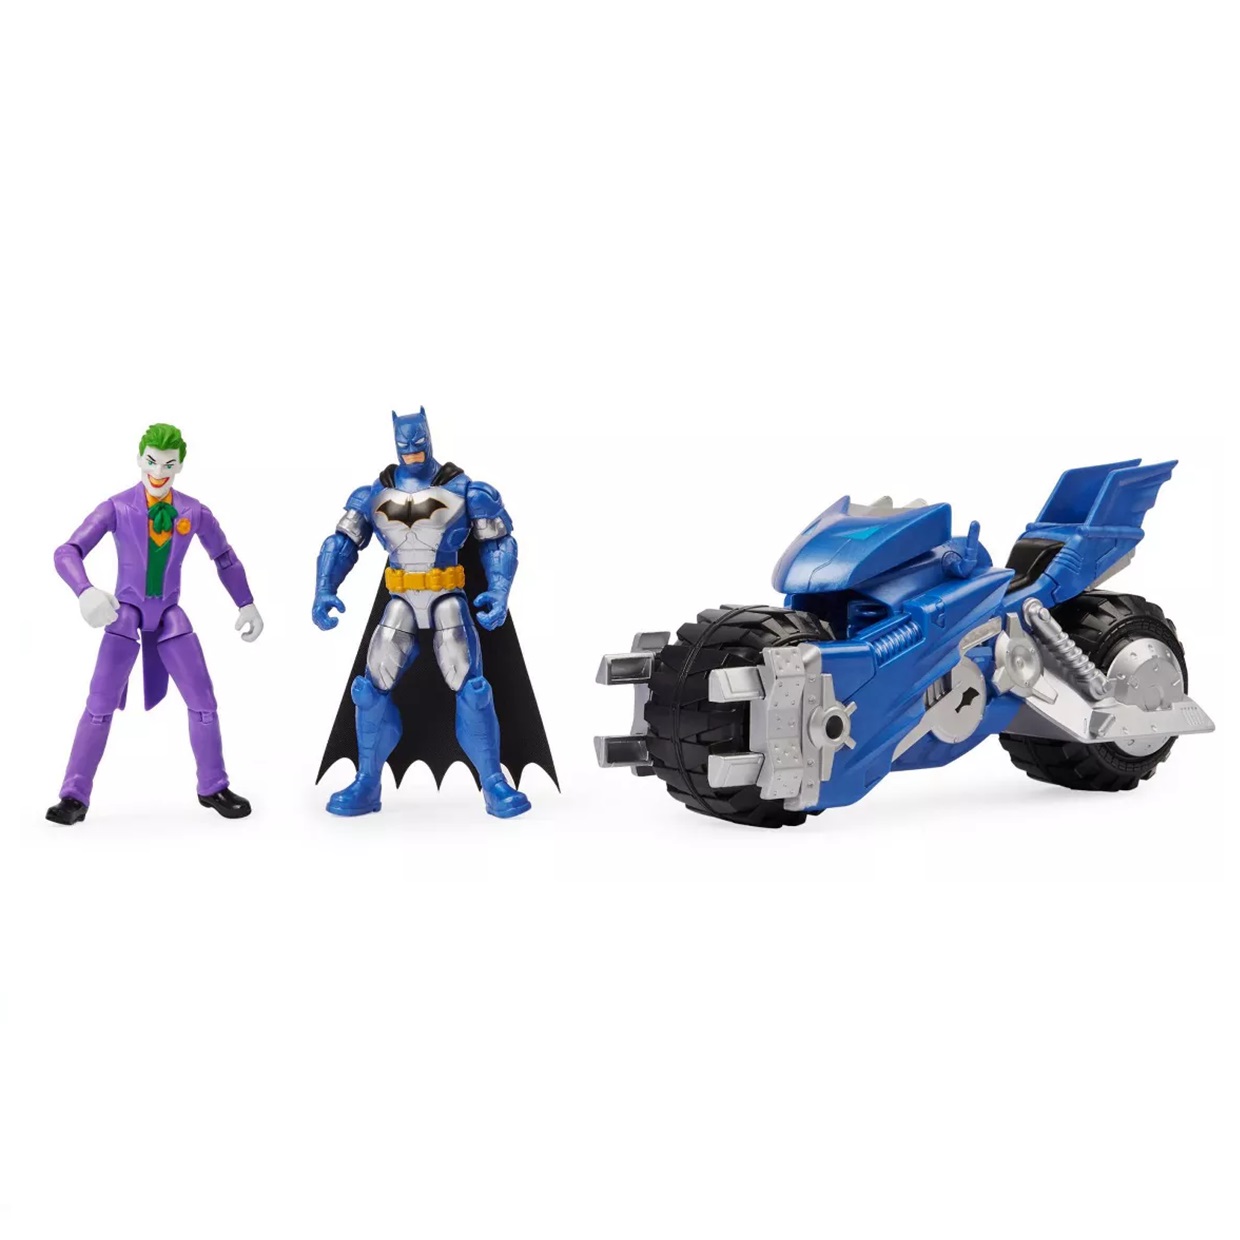 Batcycle The Joker Vs Batman The Caped Crusader Exclusivo  Only Target